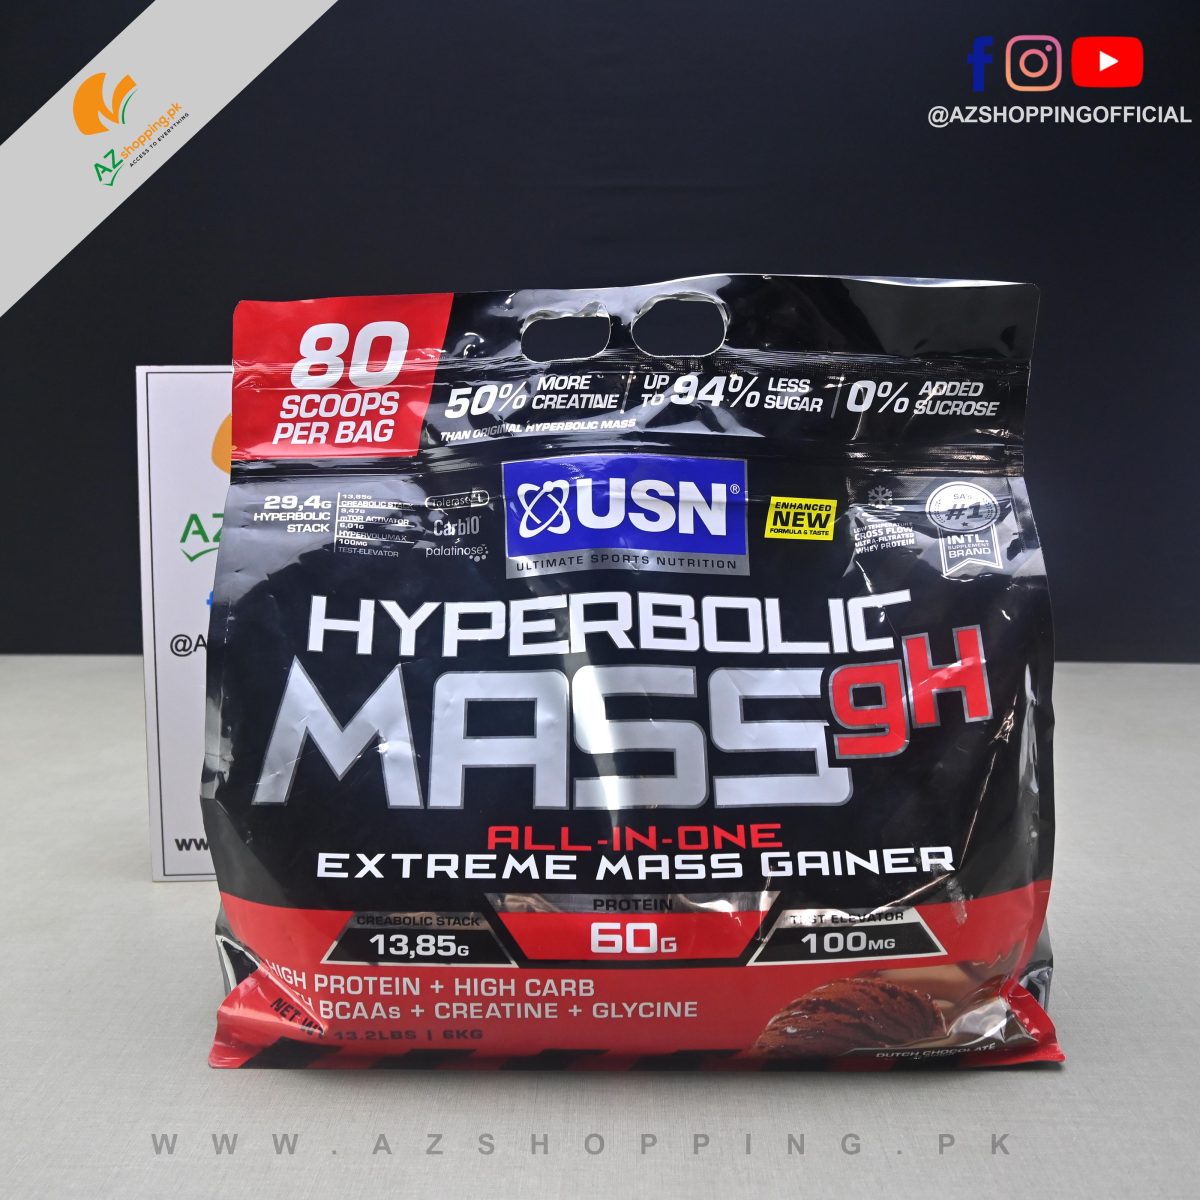 Ultimate Sports Nutrition – Hyperbolic Mass GH – All in One Extreme Mass Gainer with (High Protein + High Carb + with BCAAs + Creatine + Glycine) For Extreme Size, Power And Strength Increases.– 12.2Lbs (6kg)